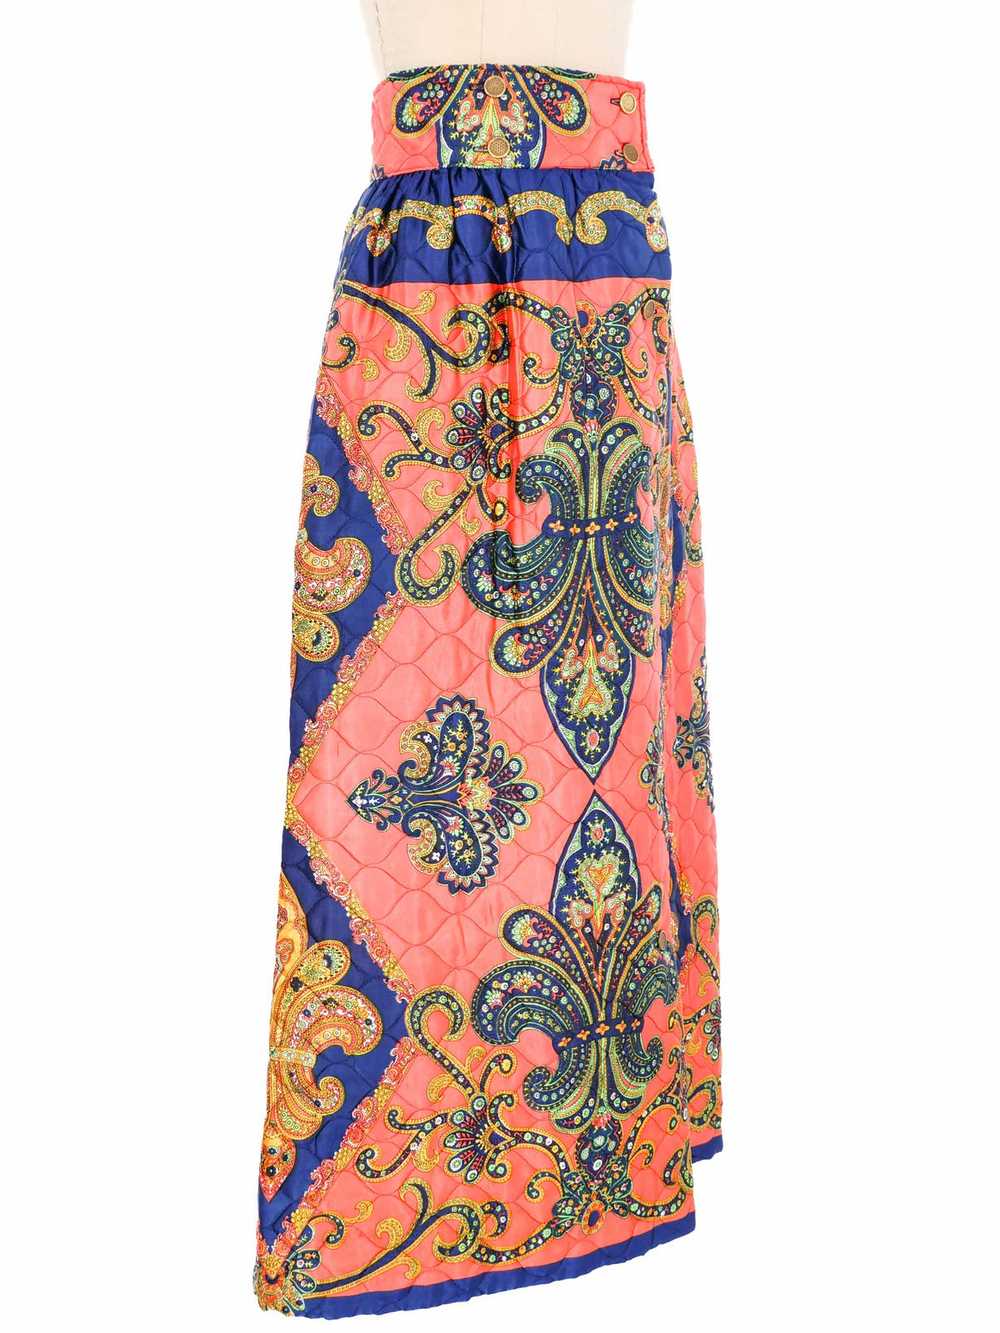 1970s Quilted Hostess Maxi Skirt - image 3